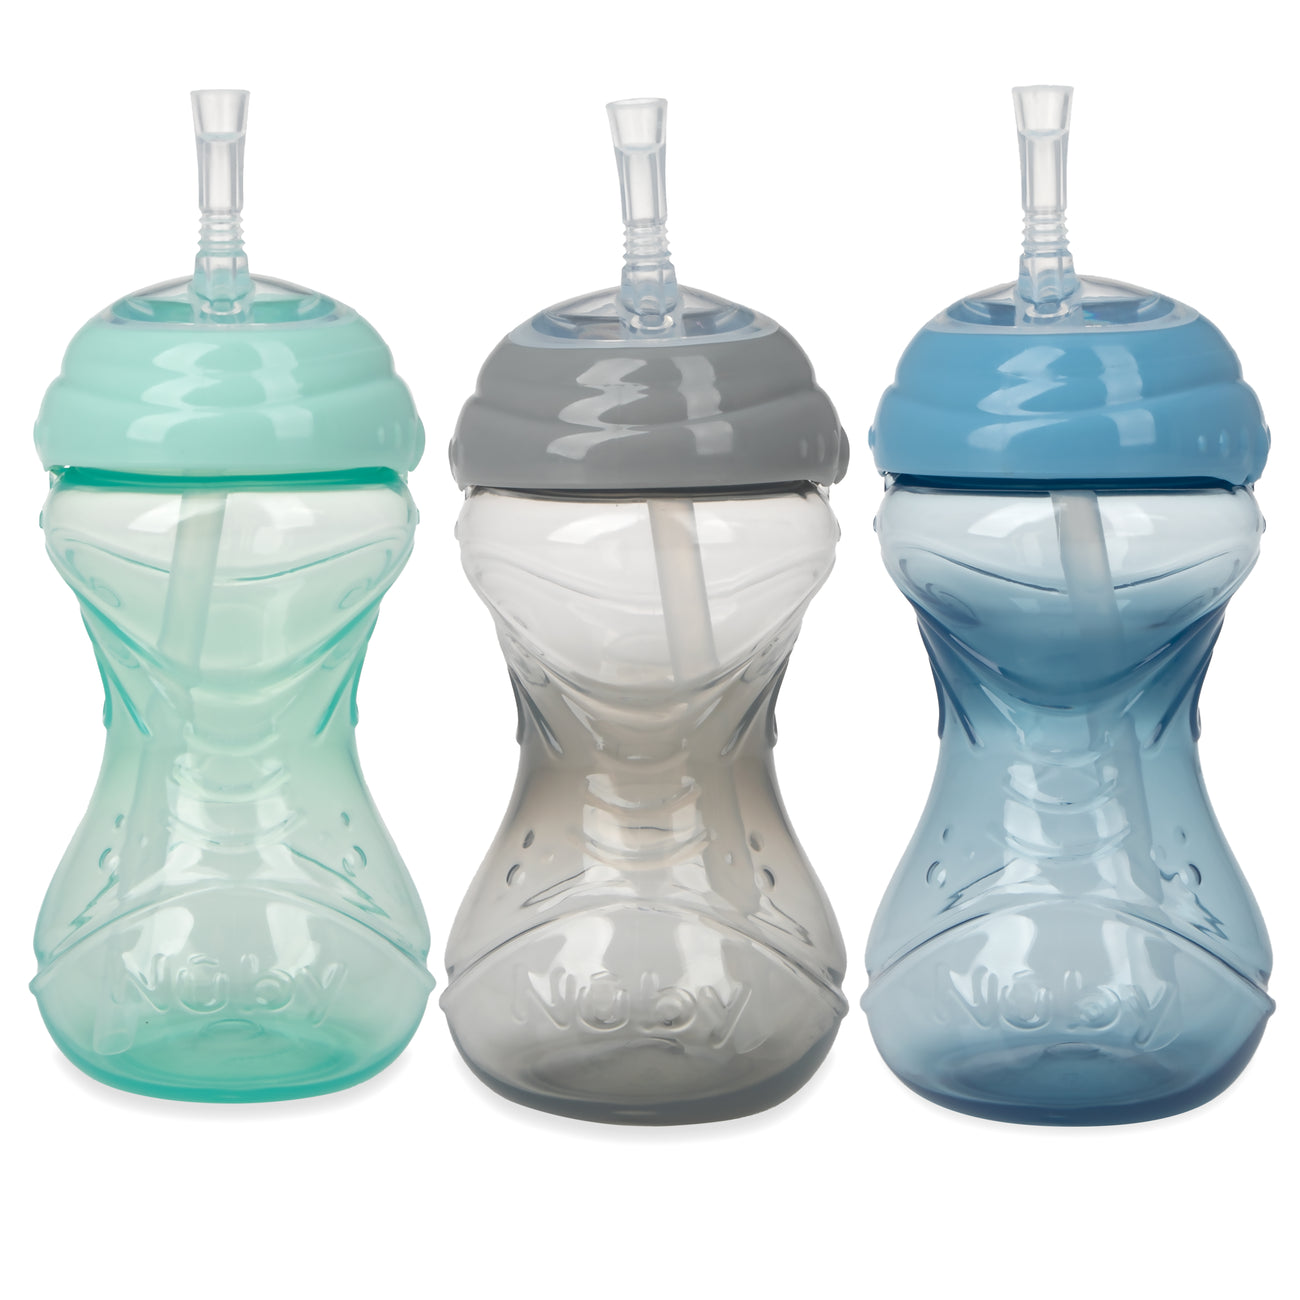 Weaning Bottle-to-Cup Bundle - Nuby US